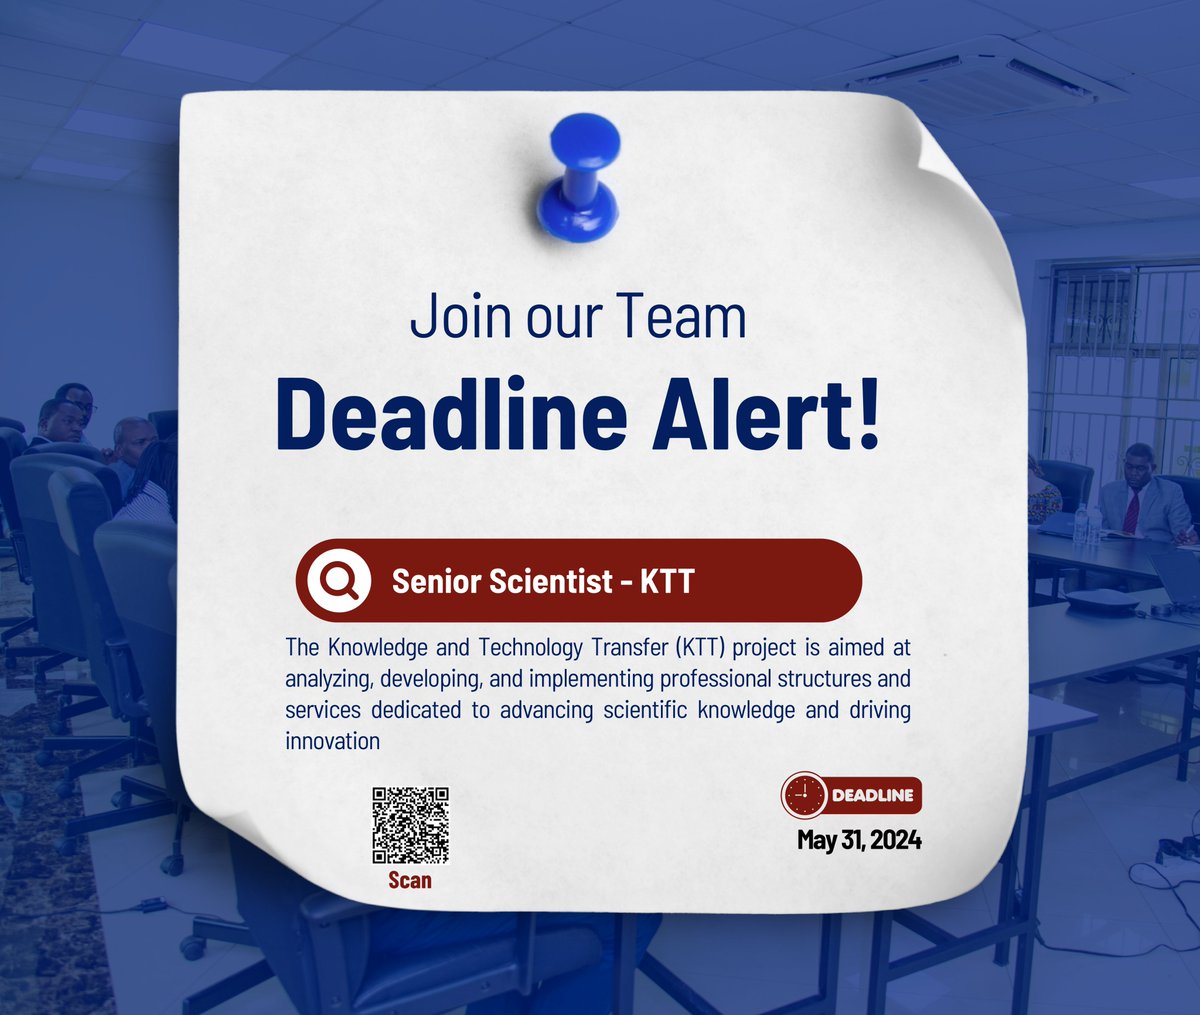 #DeadlineAlert!
Applications are still open for the position of Senior Scientist - KTT project. This is a new project established with financial support from @BMBF_Bund through @unikoblenzde.

Interested in joining us? Visit research.nexteinstein.org/application/ca… before May 31, 2024, 23:59 CAT